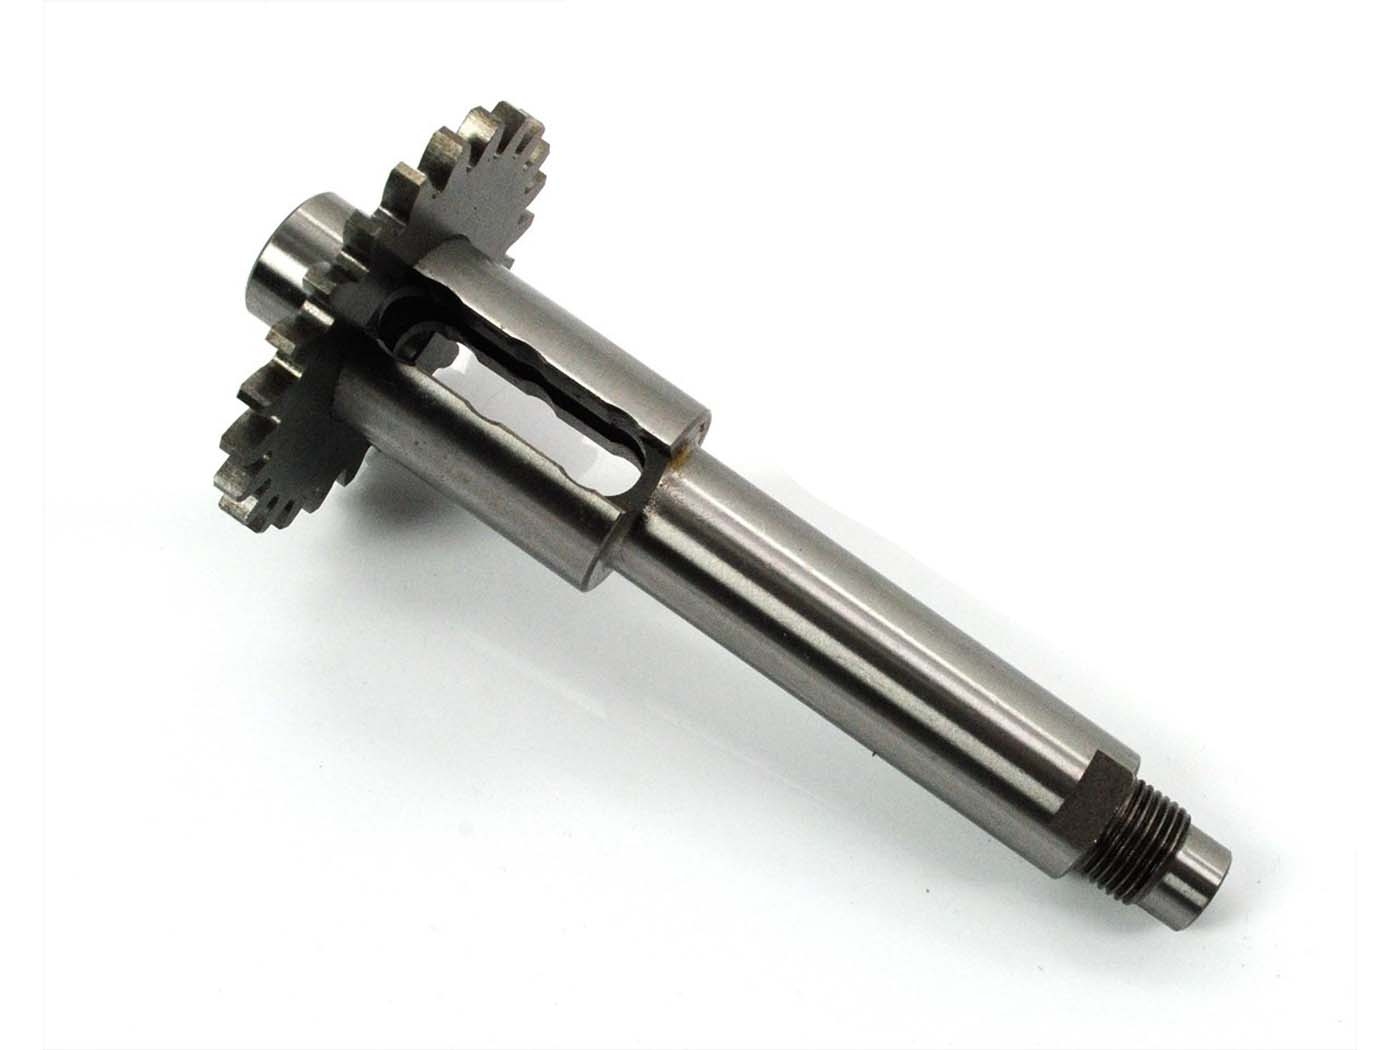 Gearbox Main Shaft Total Shaft Length Approx. 116mm Length From Idler Wheel Mounting 69mm For Hercules, DKW, Miele, Rixe